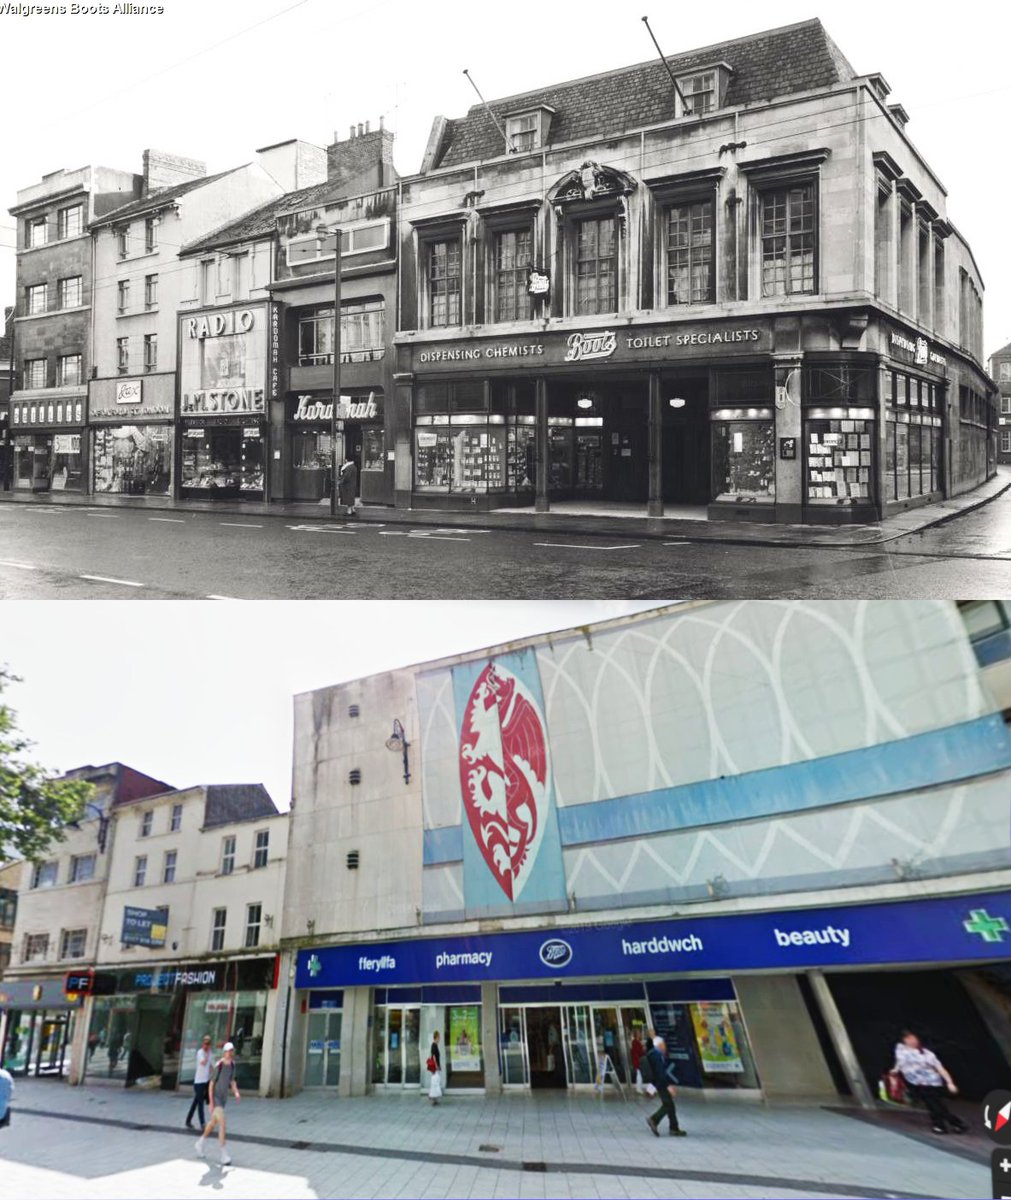 Some of my favourite lost architecture of Cardiff - 1) Boots Queen St